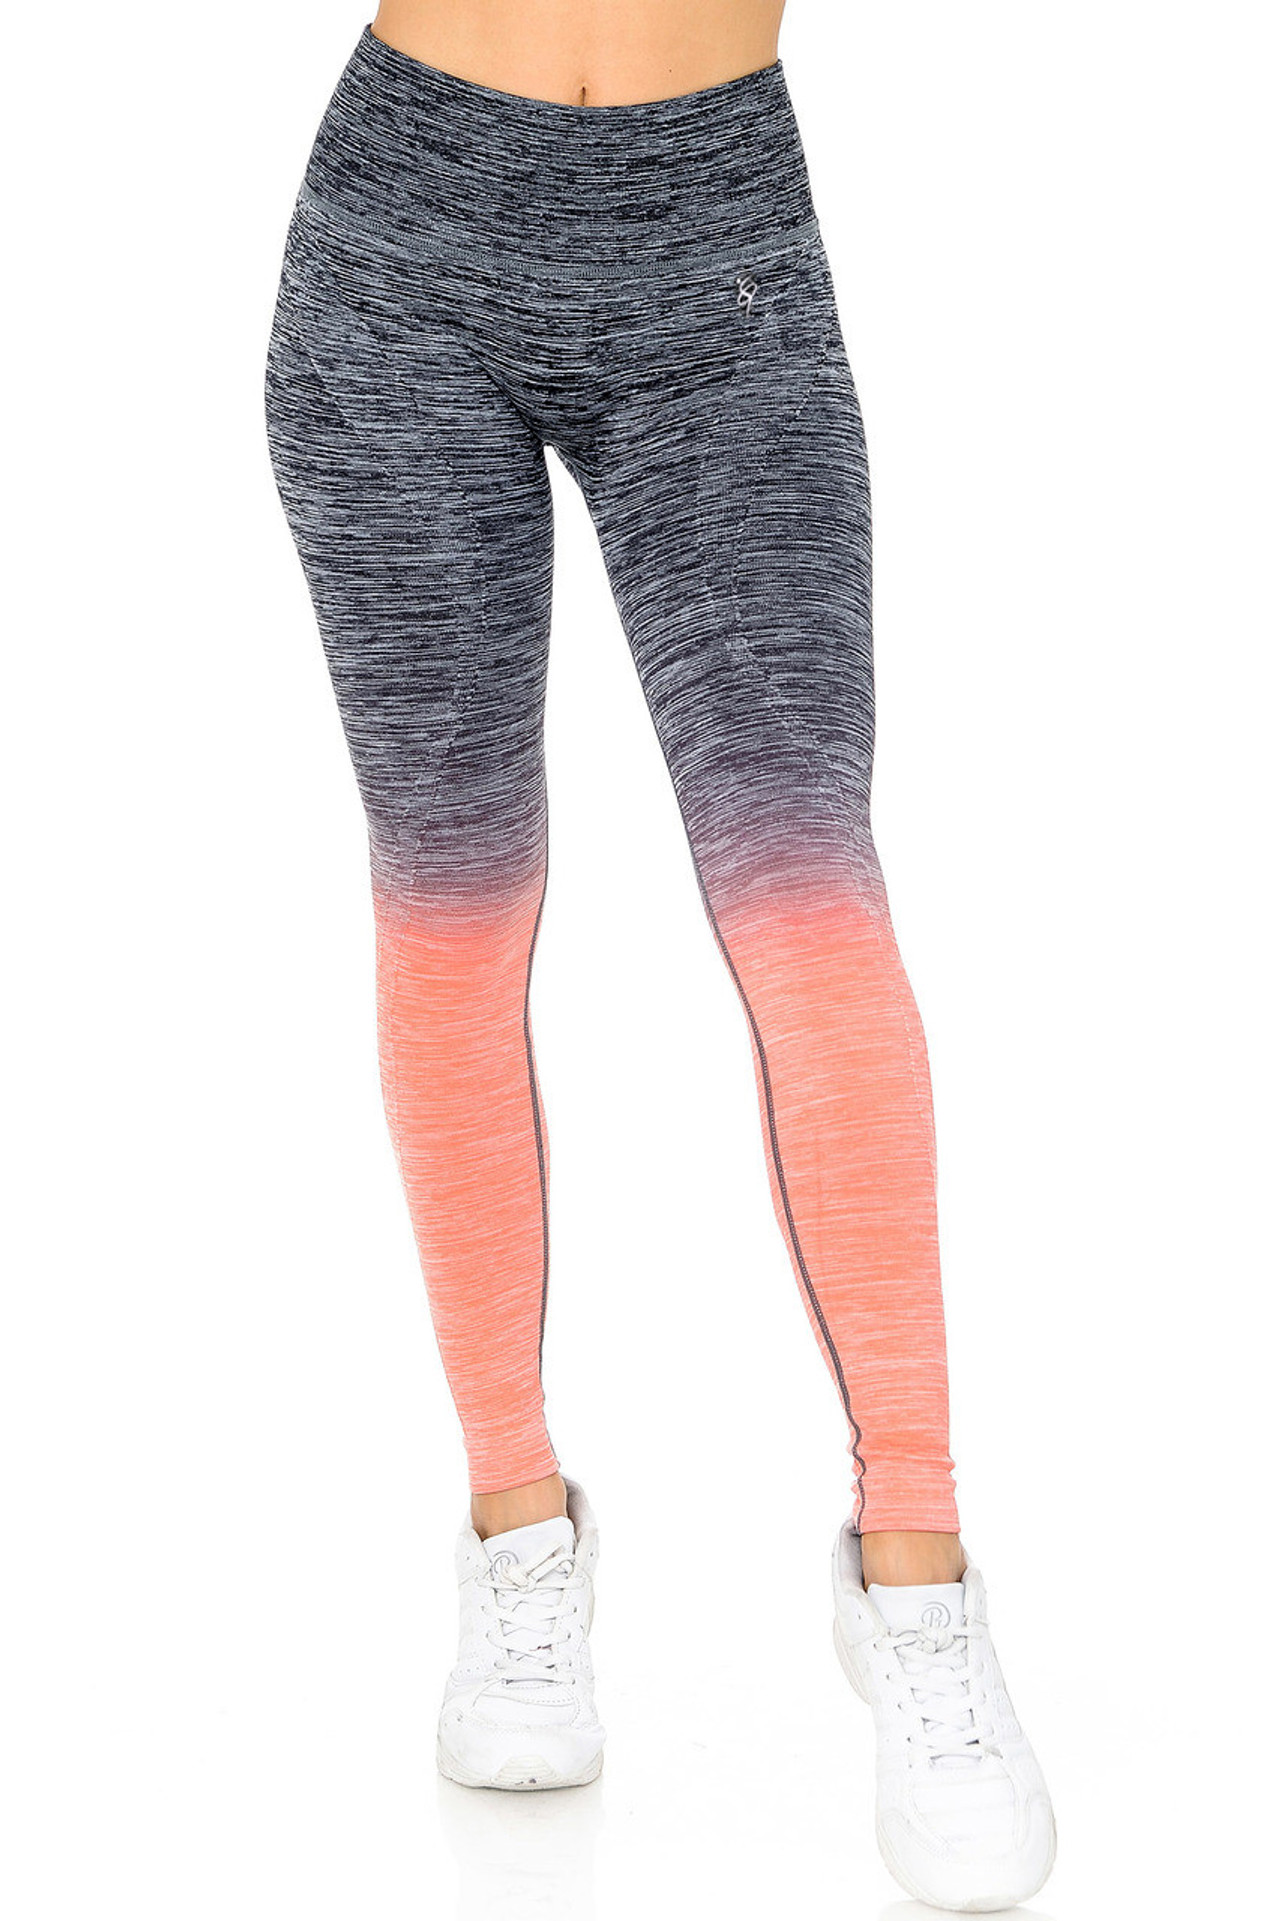 Balance Collection, Pants & Jumpsuits, Balance Collection Yoga Pants  Buttery Soft Material